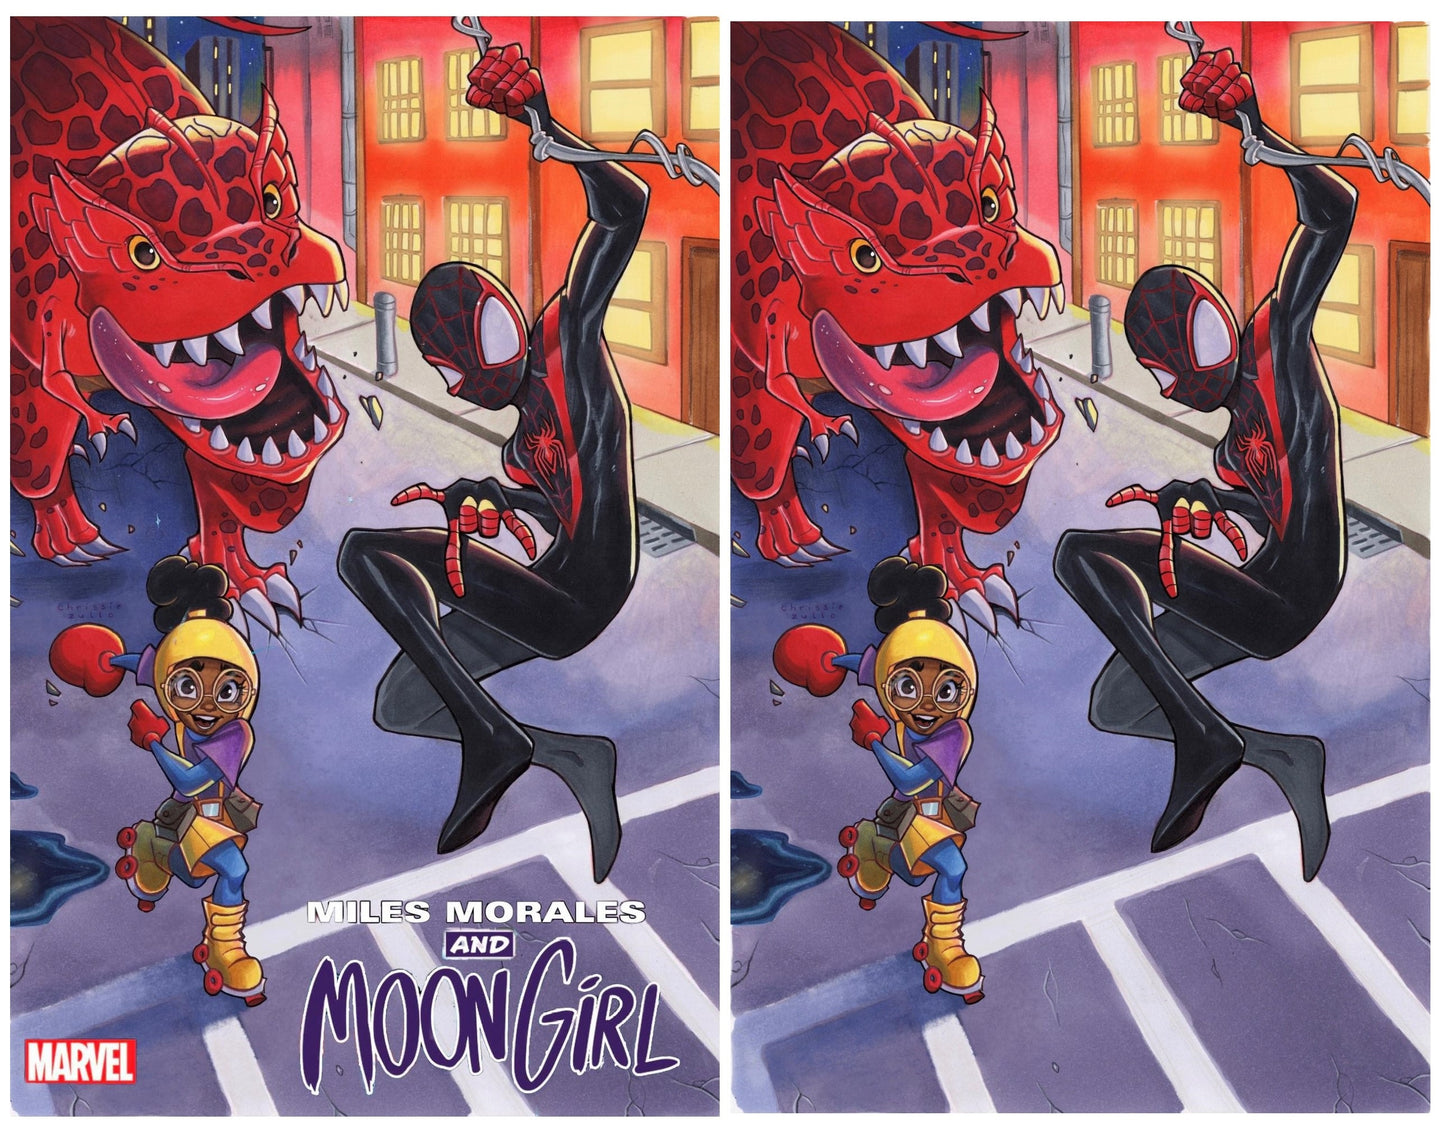 MILES MORALES MOON GIRL #1 CHRISSIE ZULLO TRADE/VIRGIN VARIANT SET LIMITED TO 600 SETS WITH COA